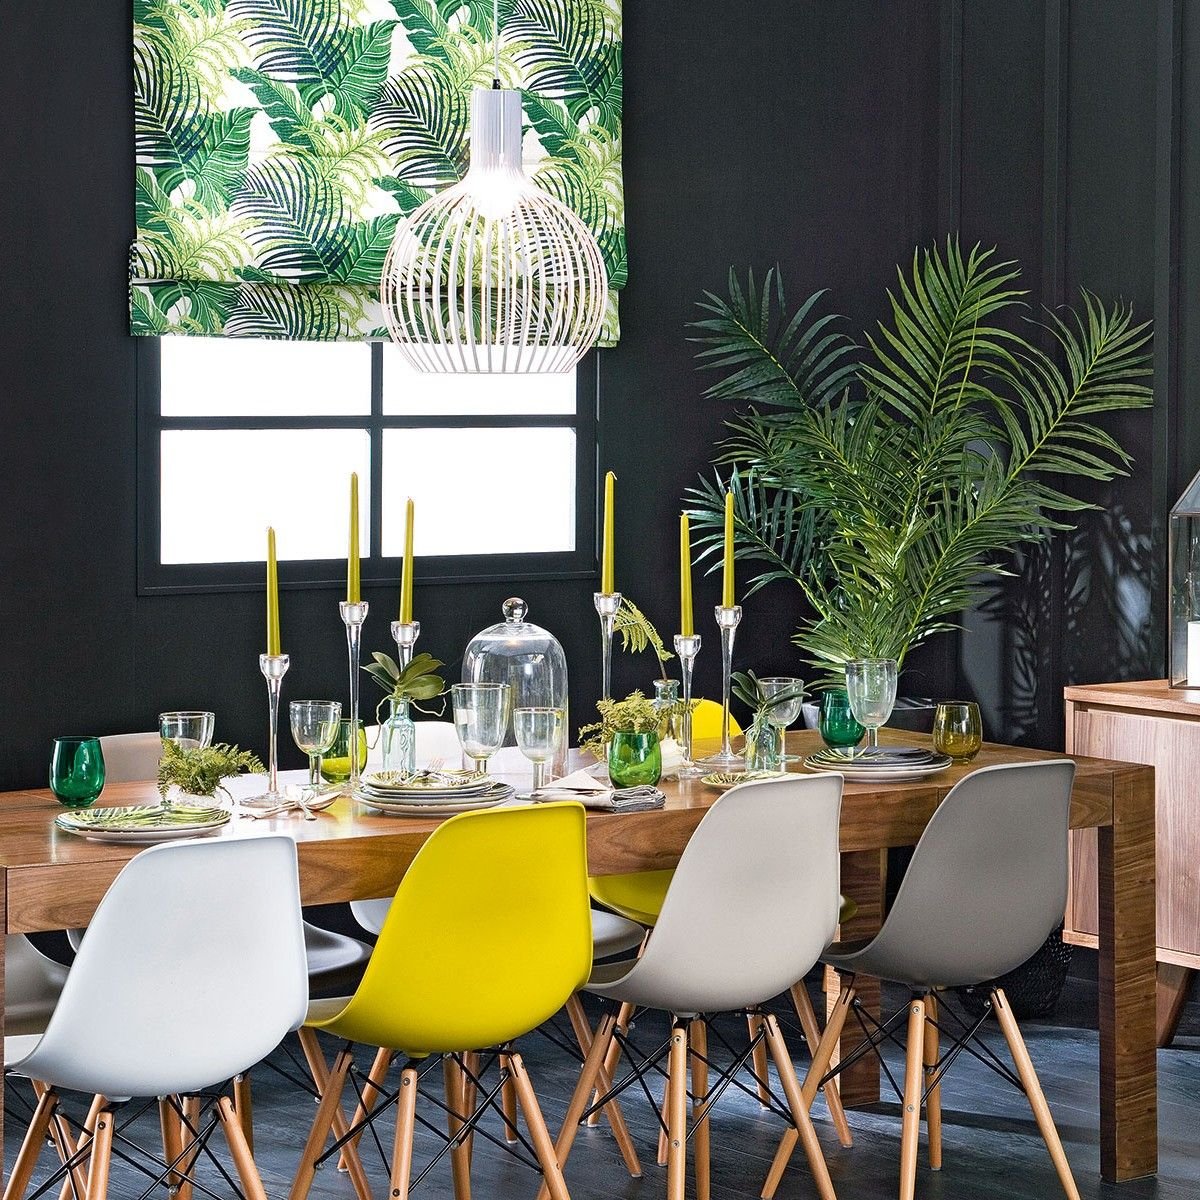 Budget dining room ideas – serve up fresh decor looks on a shoestring